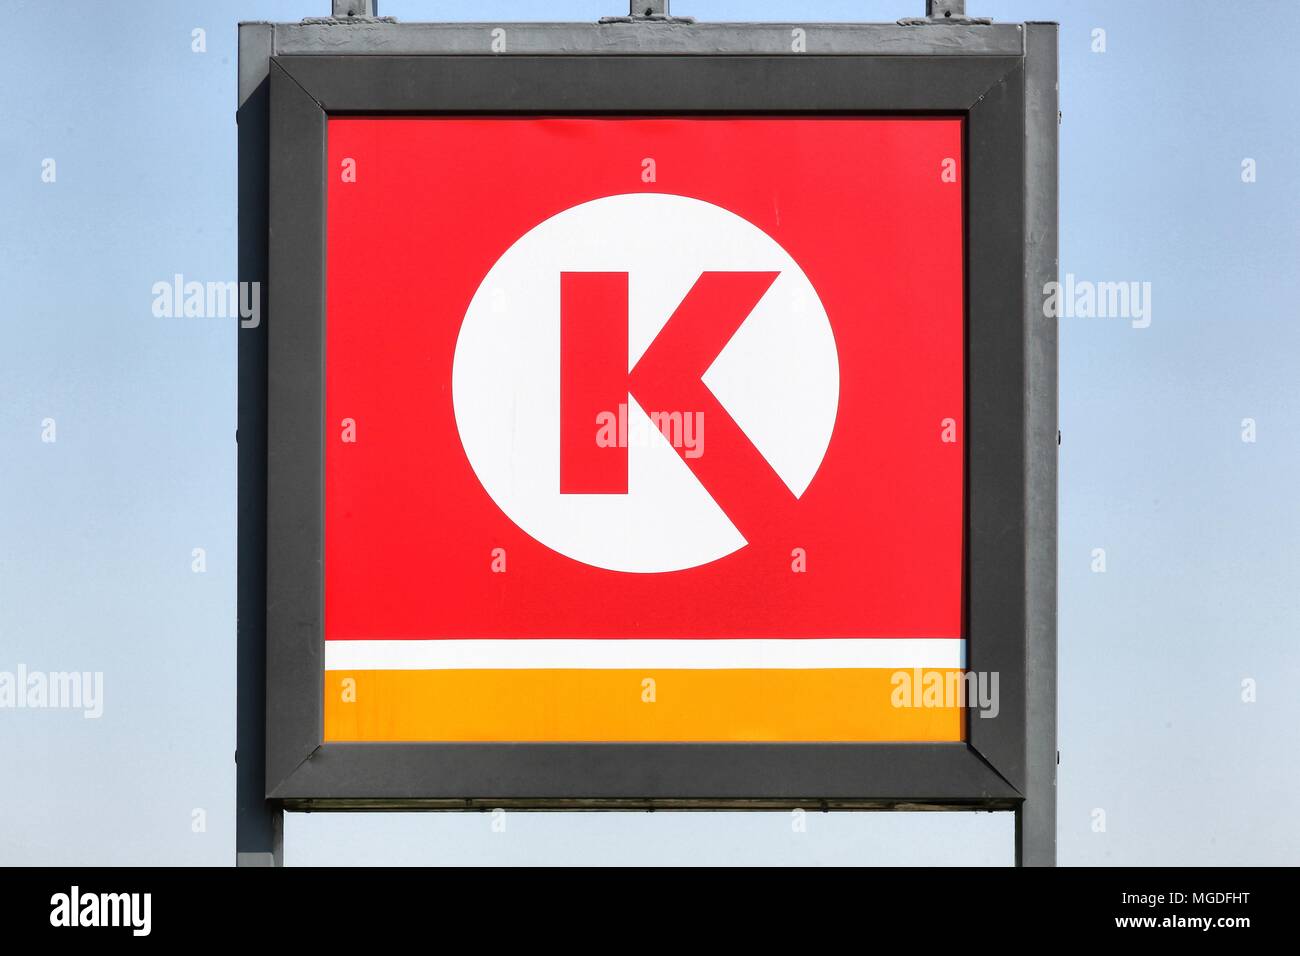 Stilling, Denmark - April 20 , 2018: Circle K logo on a panel. Circle K is an international chain of convenience stores, founded in 1951 in USA Stock Photo